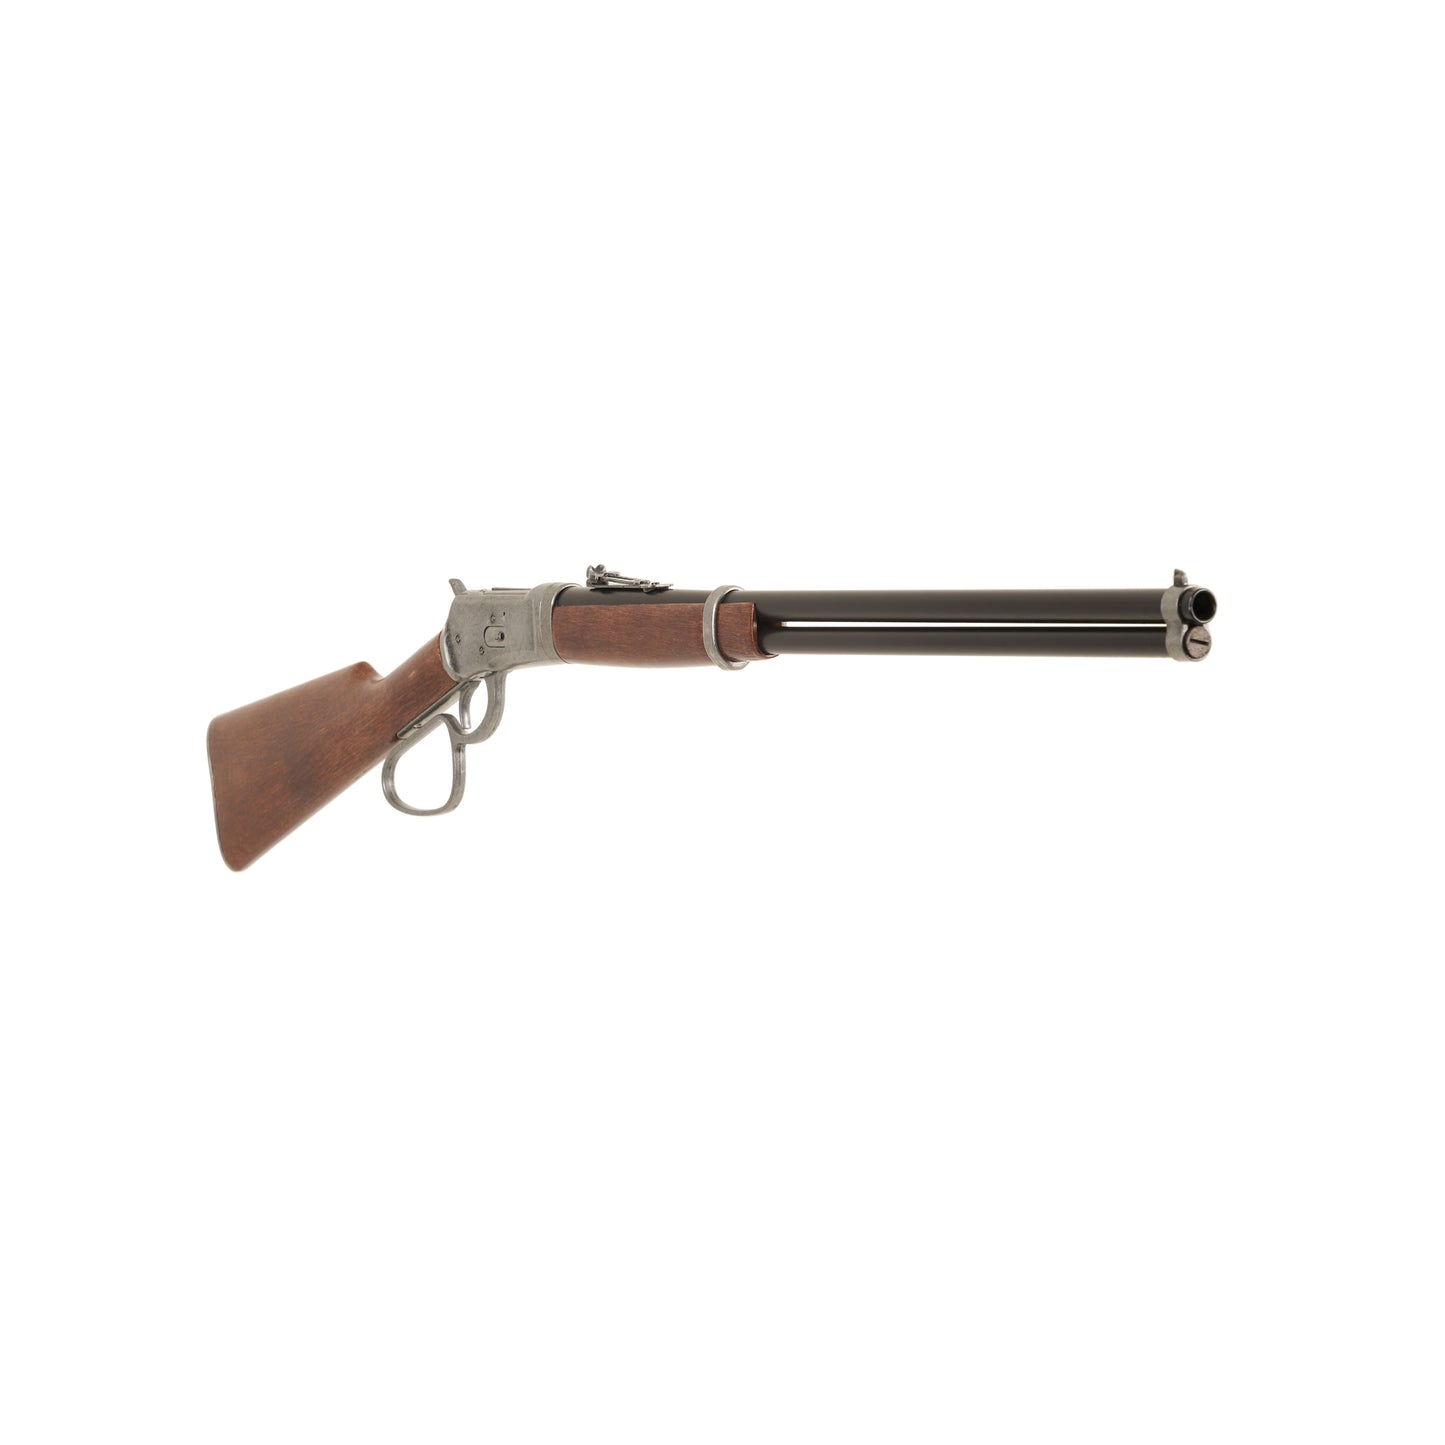 Partial front view of 1892 Old West Rifle 42 Inches long with silver fittings and black barrel.